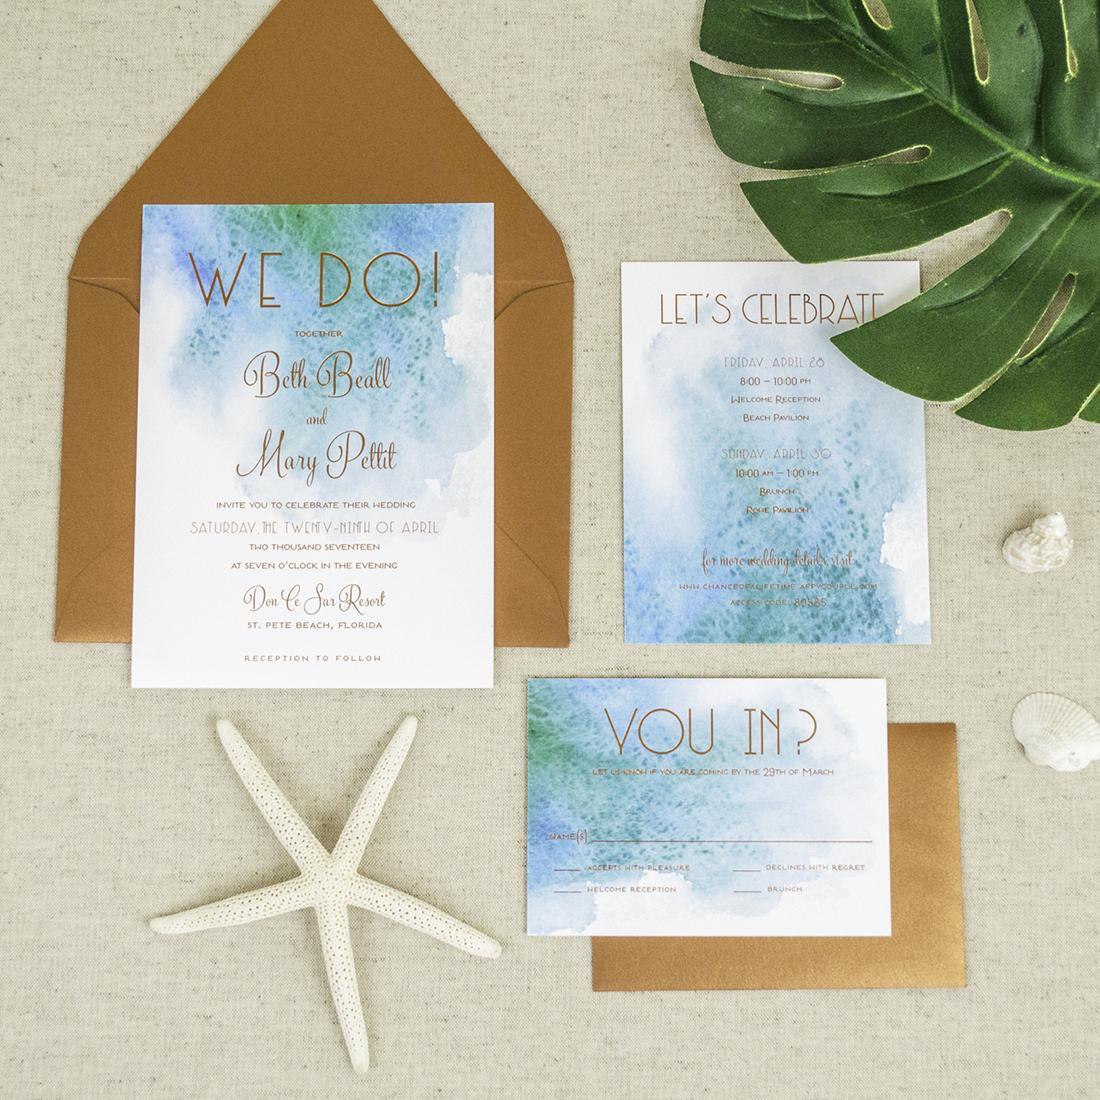 These modern beach themed wedding invitations feature a watercolor design reflecting the seaside beauty without having the typical "beachy" elements.